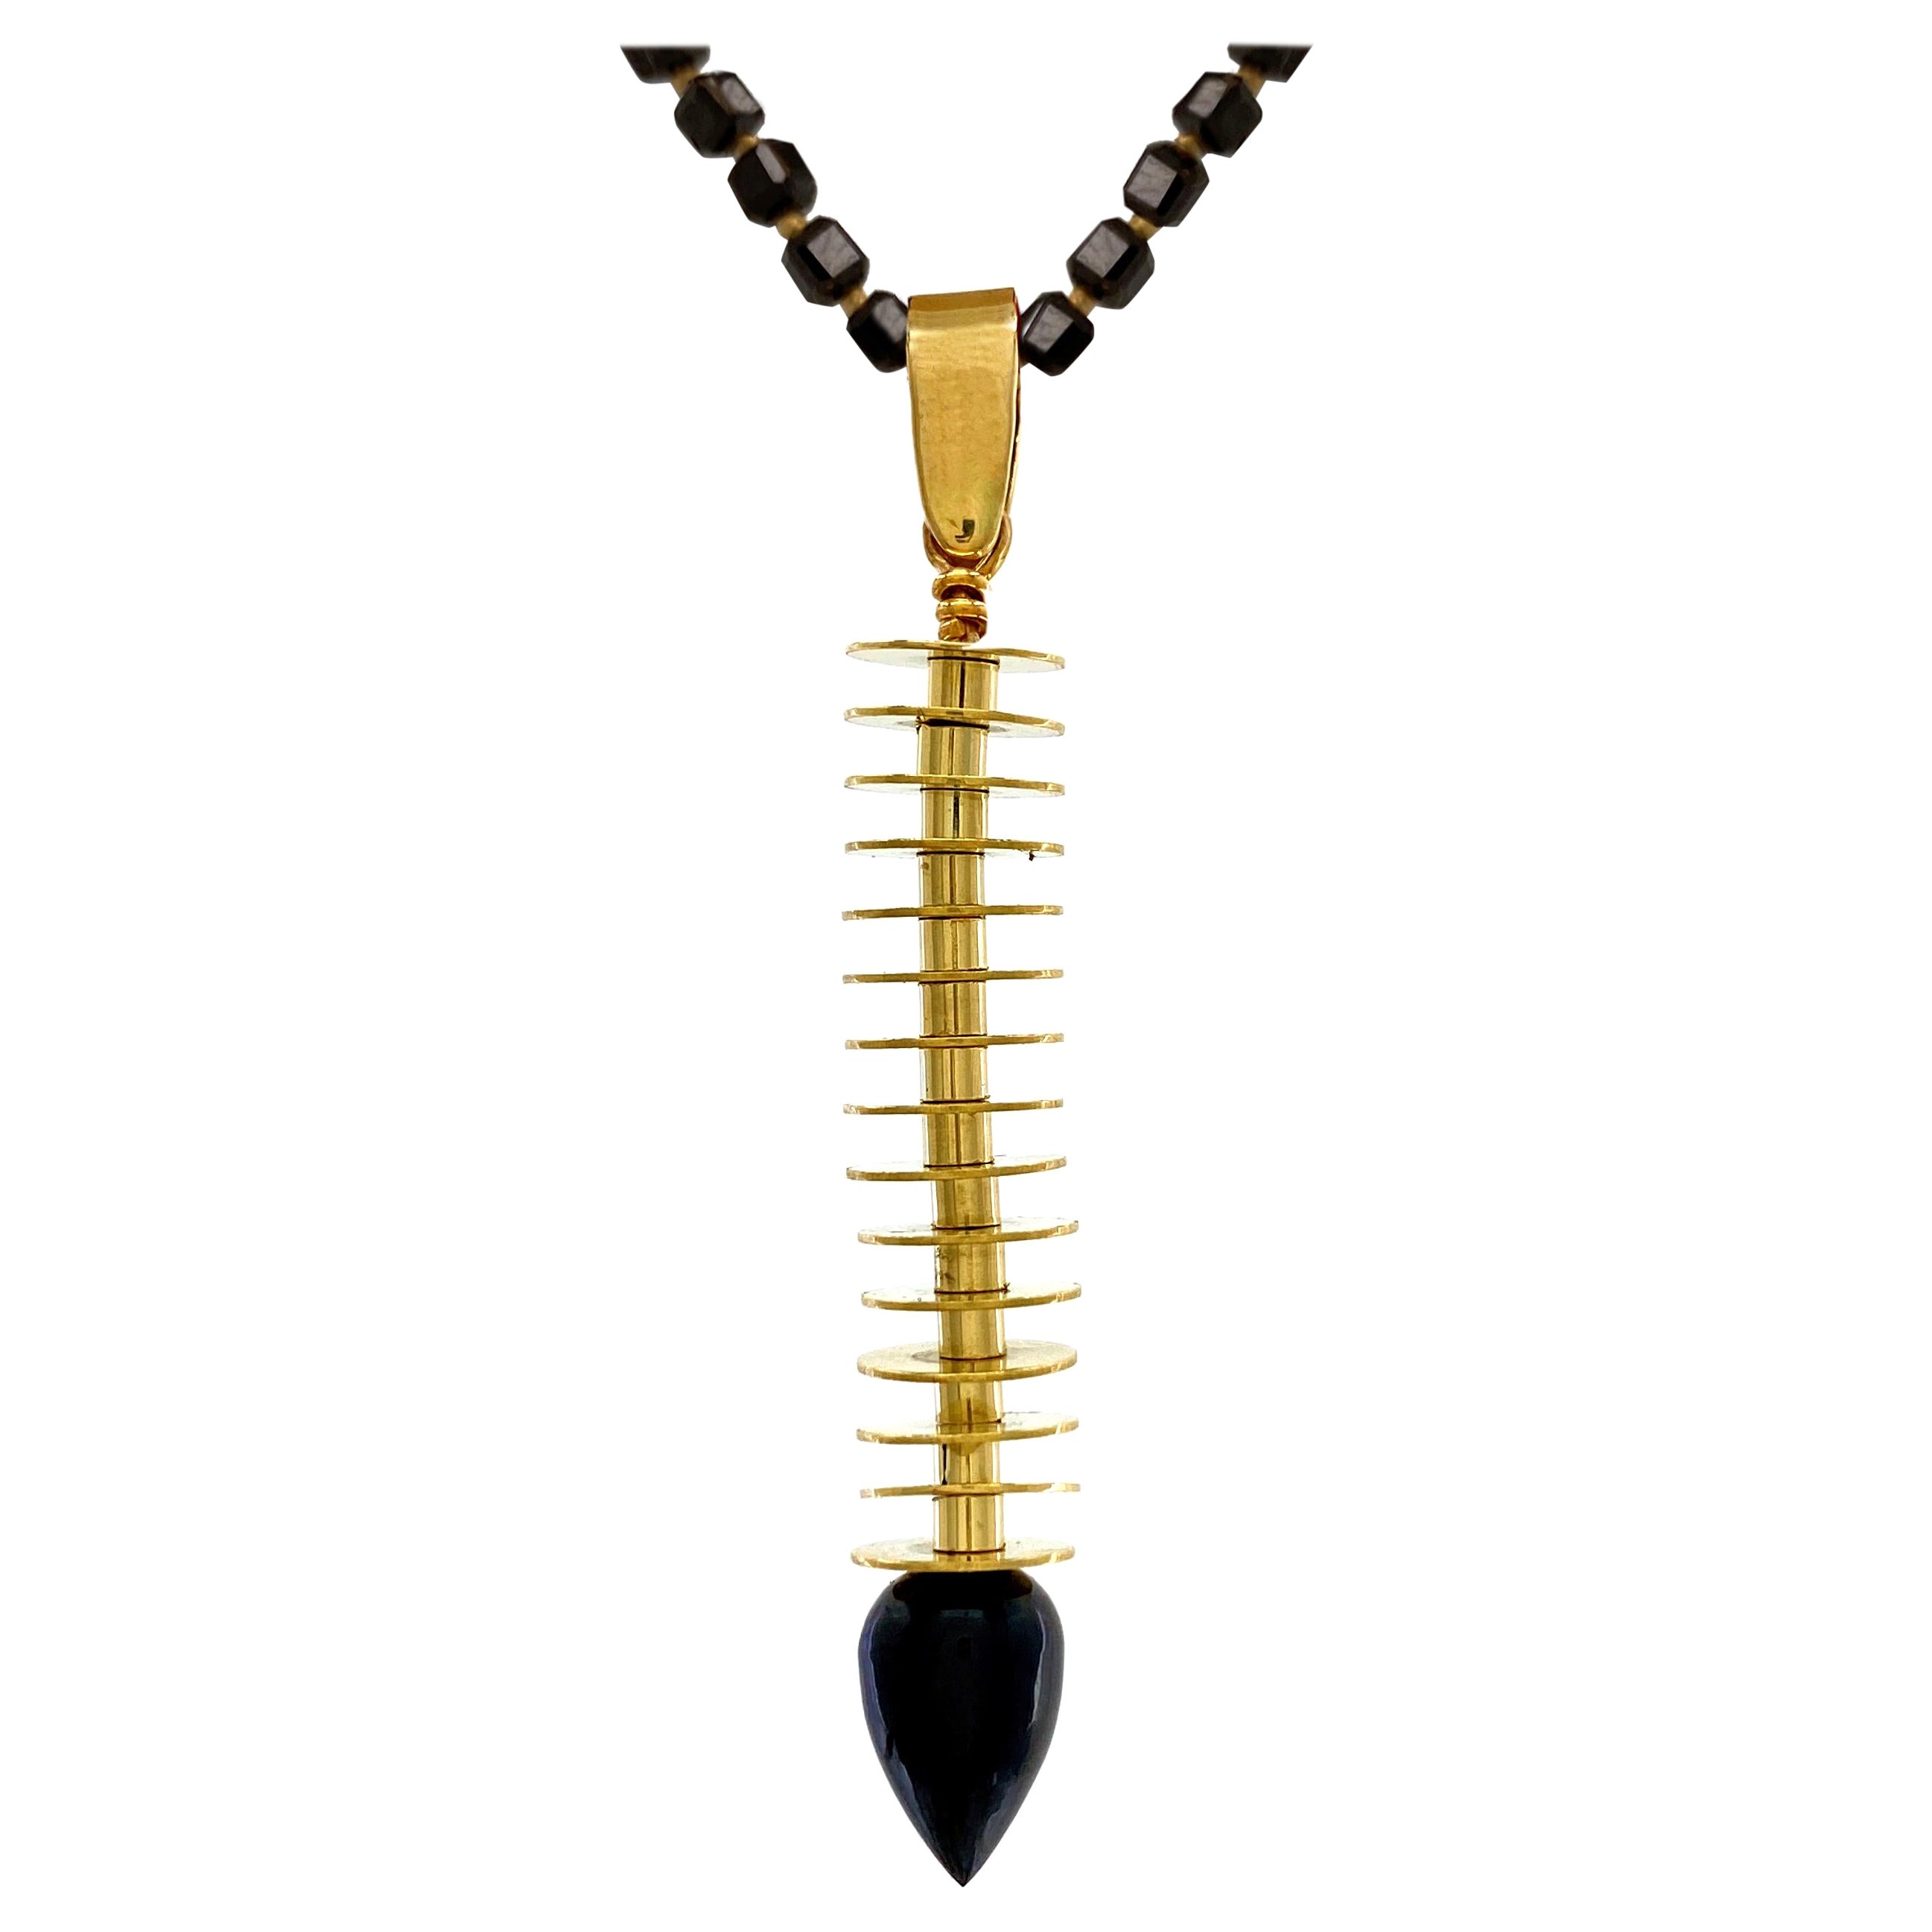 "Spinal Spinel" Pendant in 18K Gold with Black Spinel Drop & Beaded Necklace For Sale